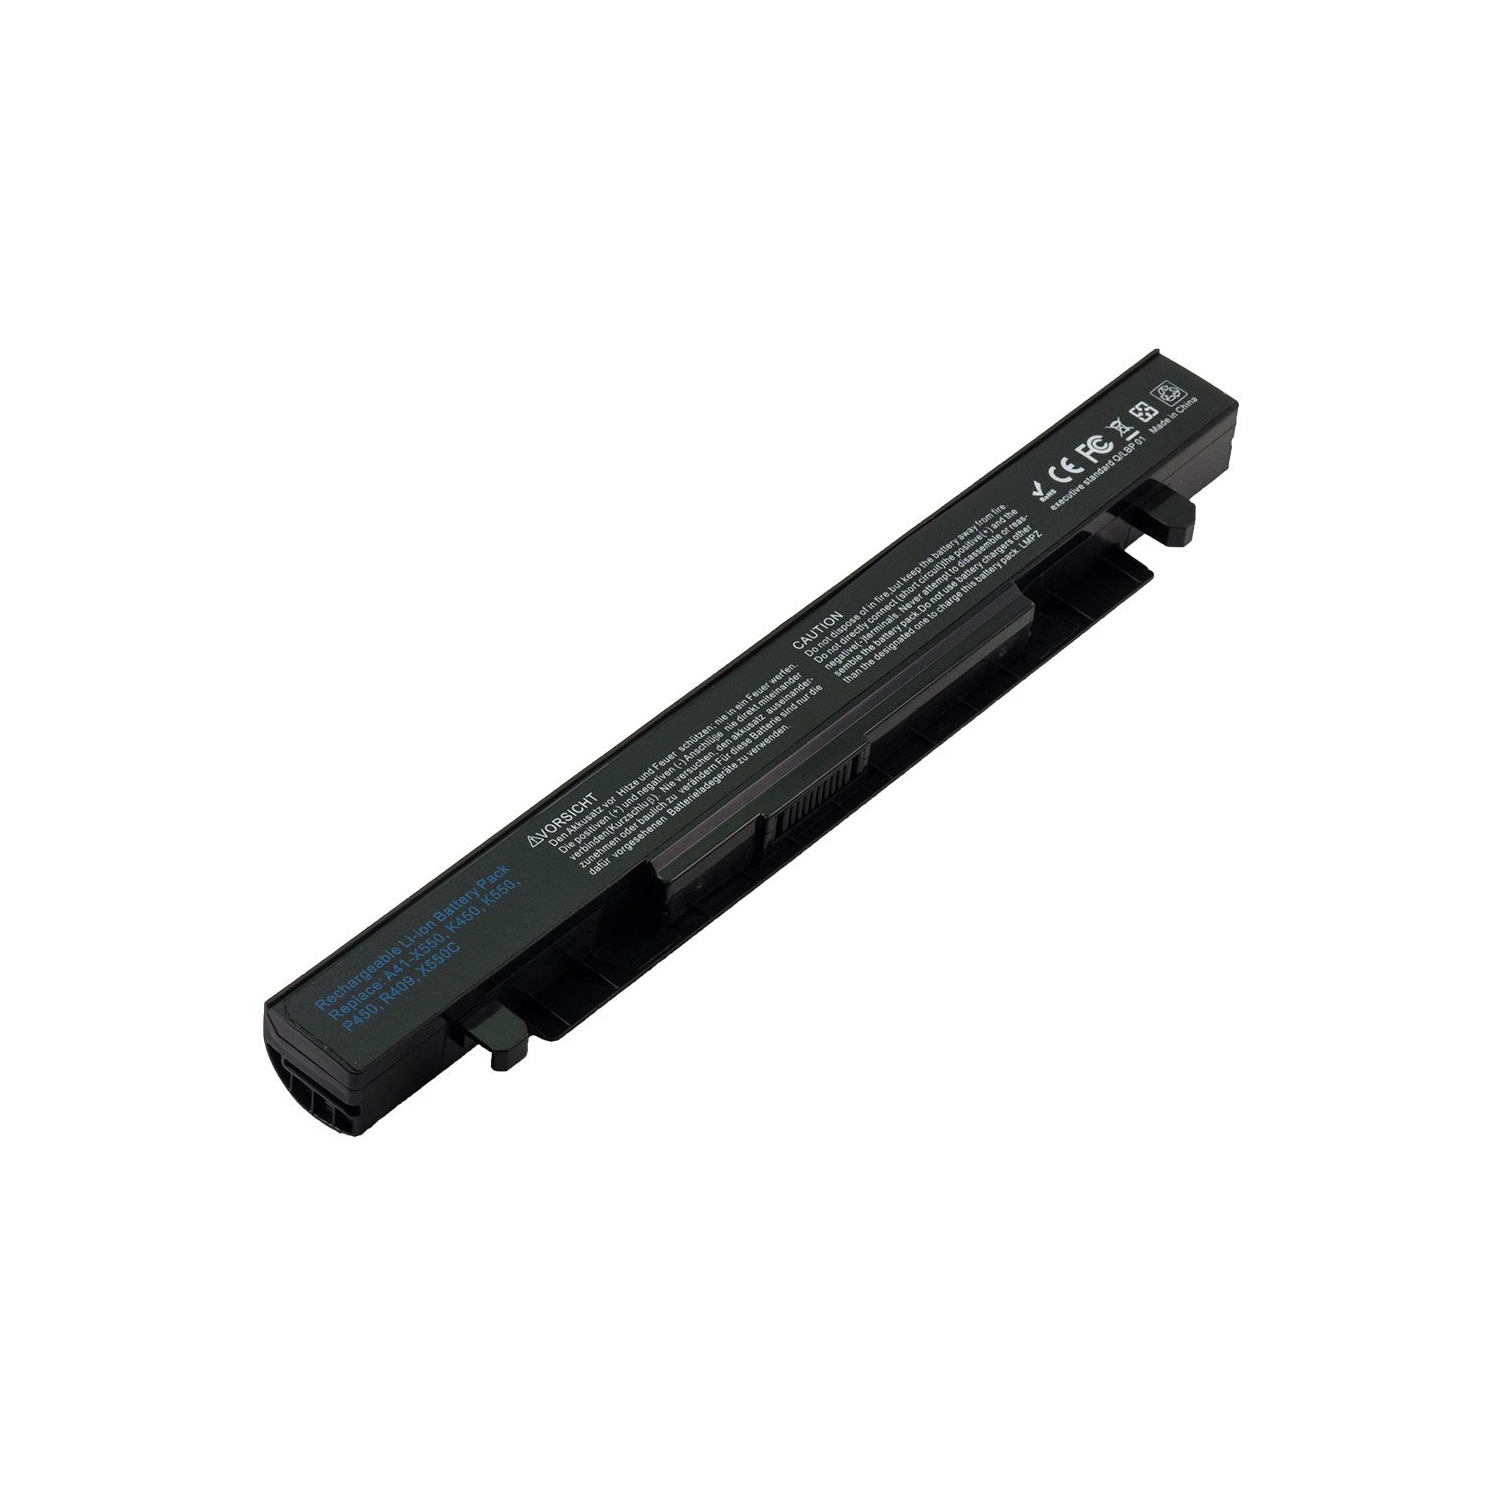 BattDepot: New Laptop Battery for Asus Y581, 0B110-00230000, 0B110-00230100, A41-X550, A41-X550A